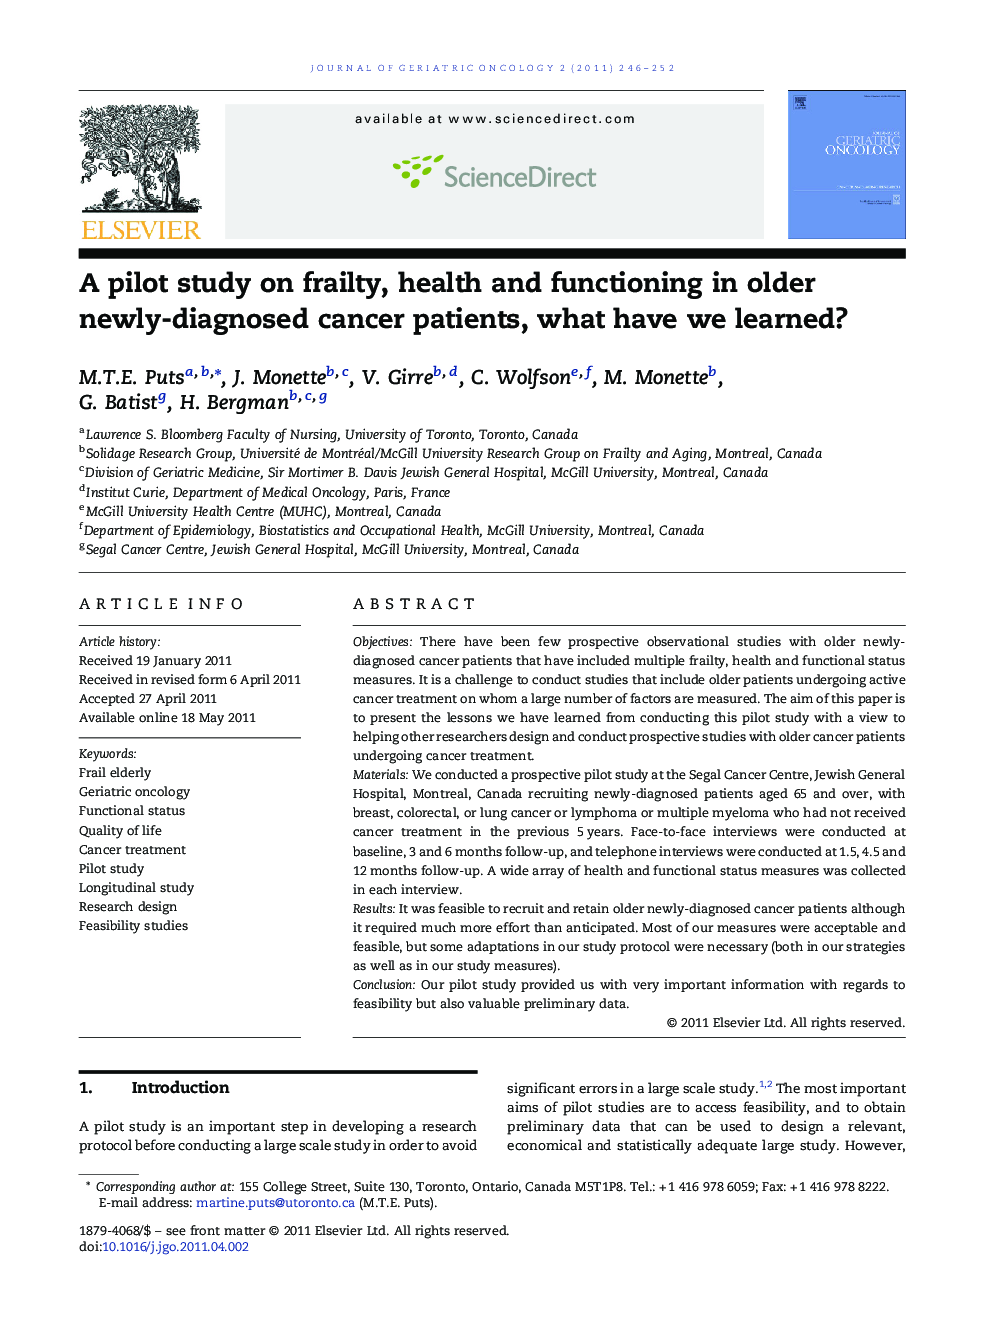 A pilot study on frailty, health and functioning in older newly-diagnosed cancer patients, what have we learned?